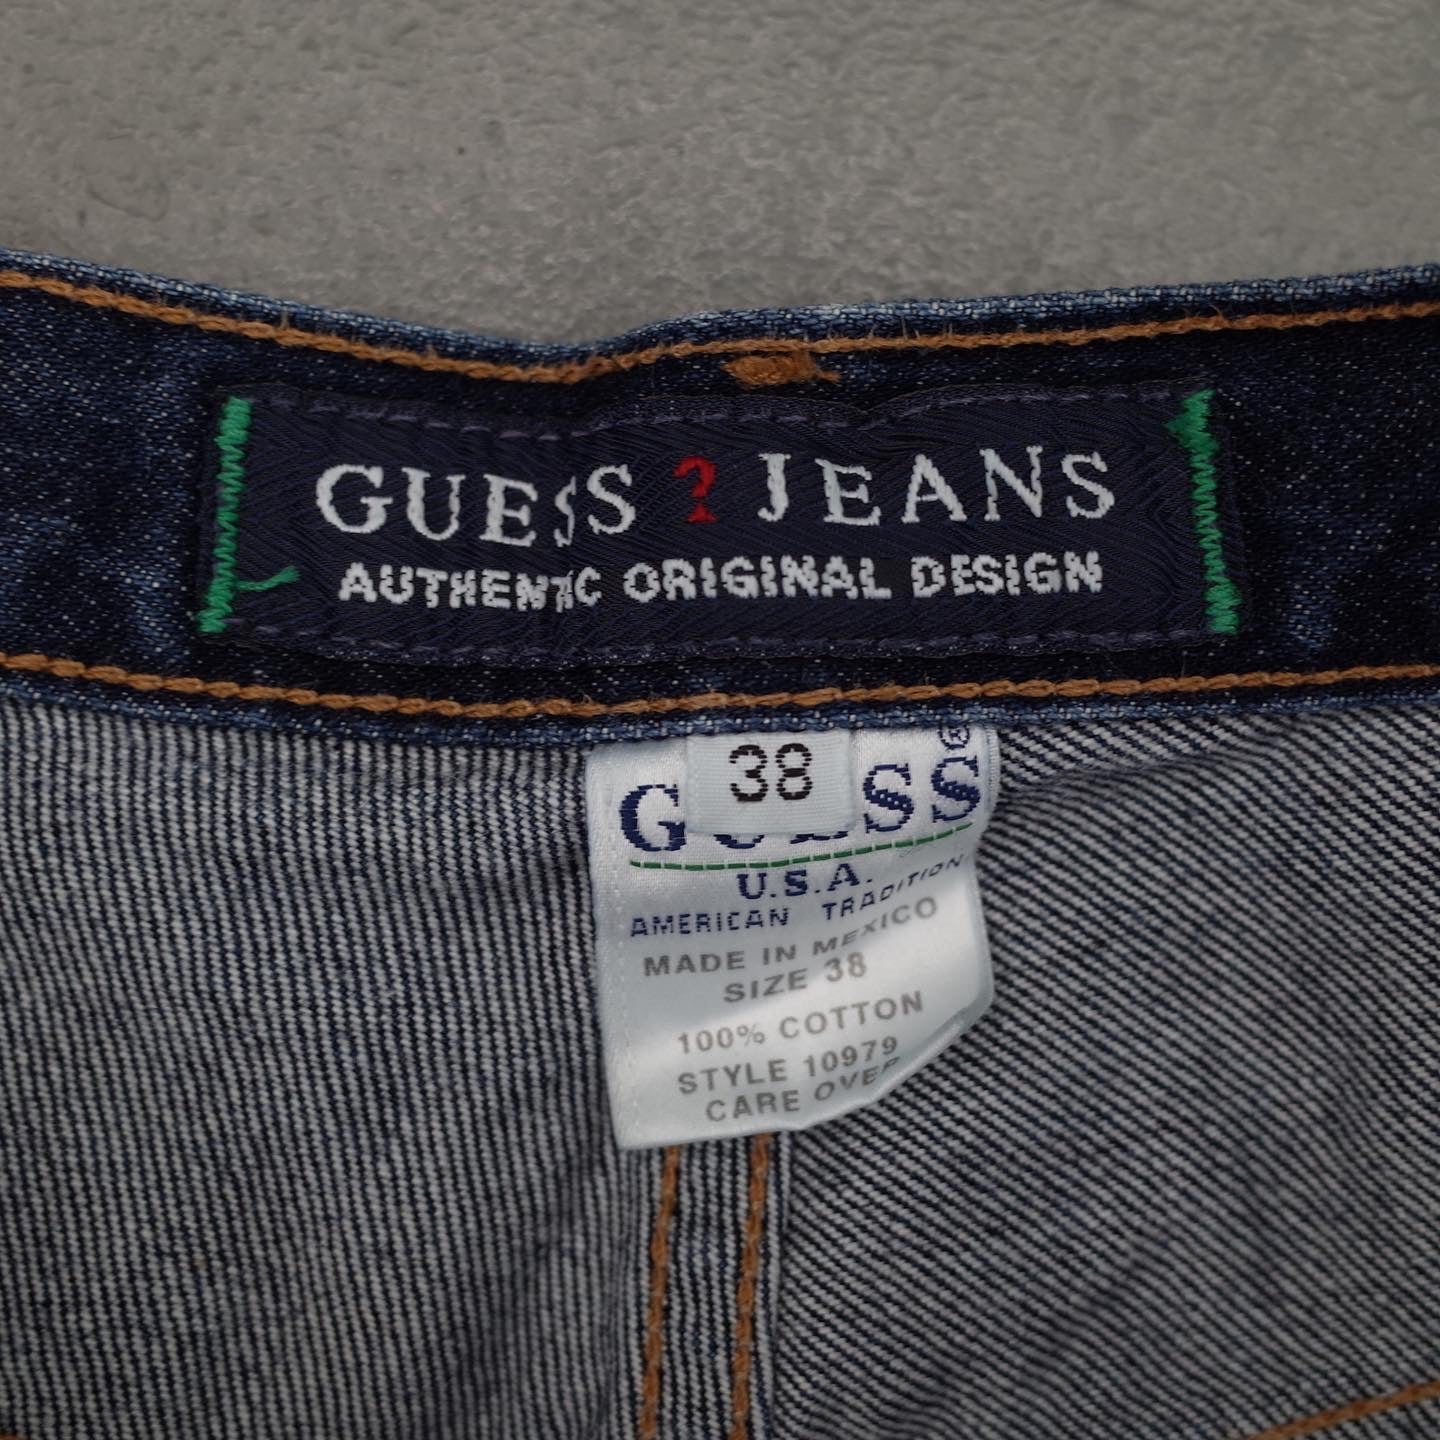 Guess Jeans Washed Denim Shorts